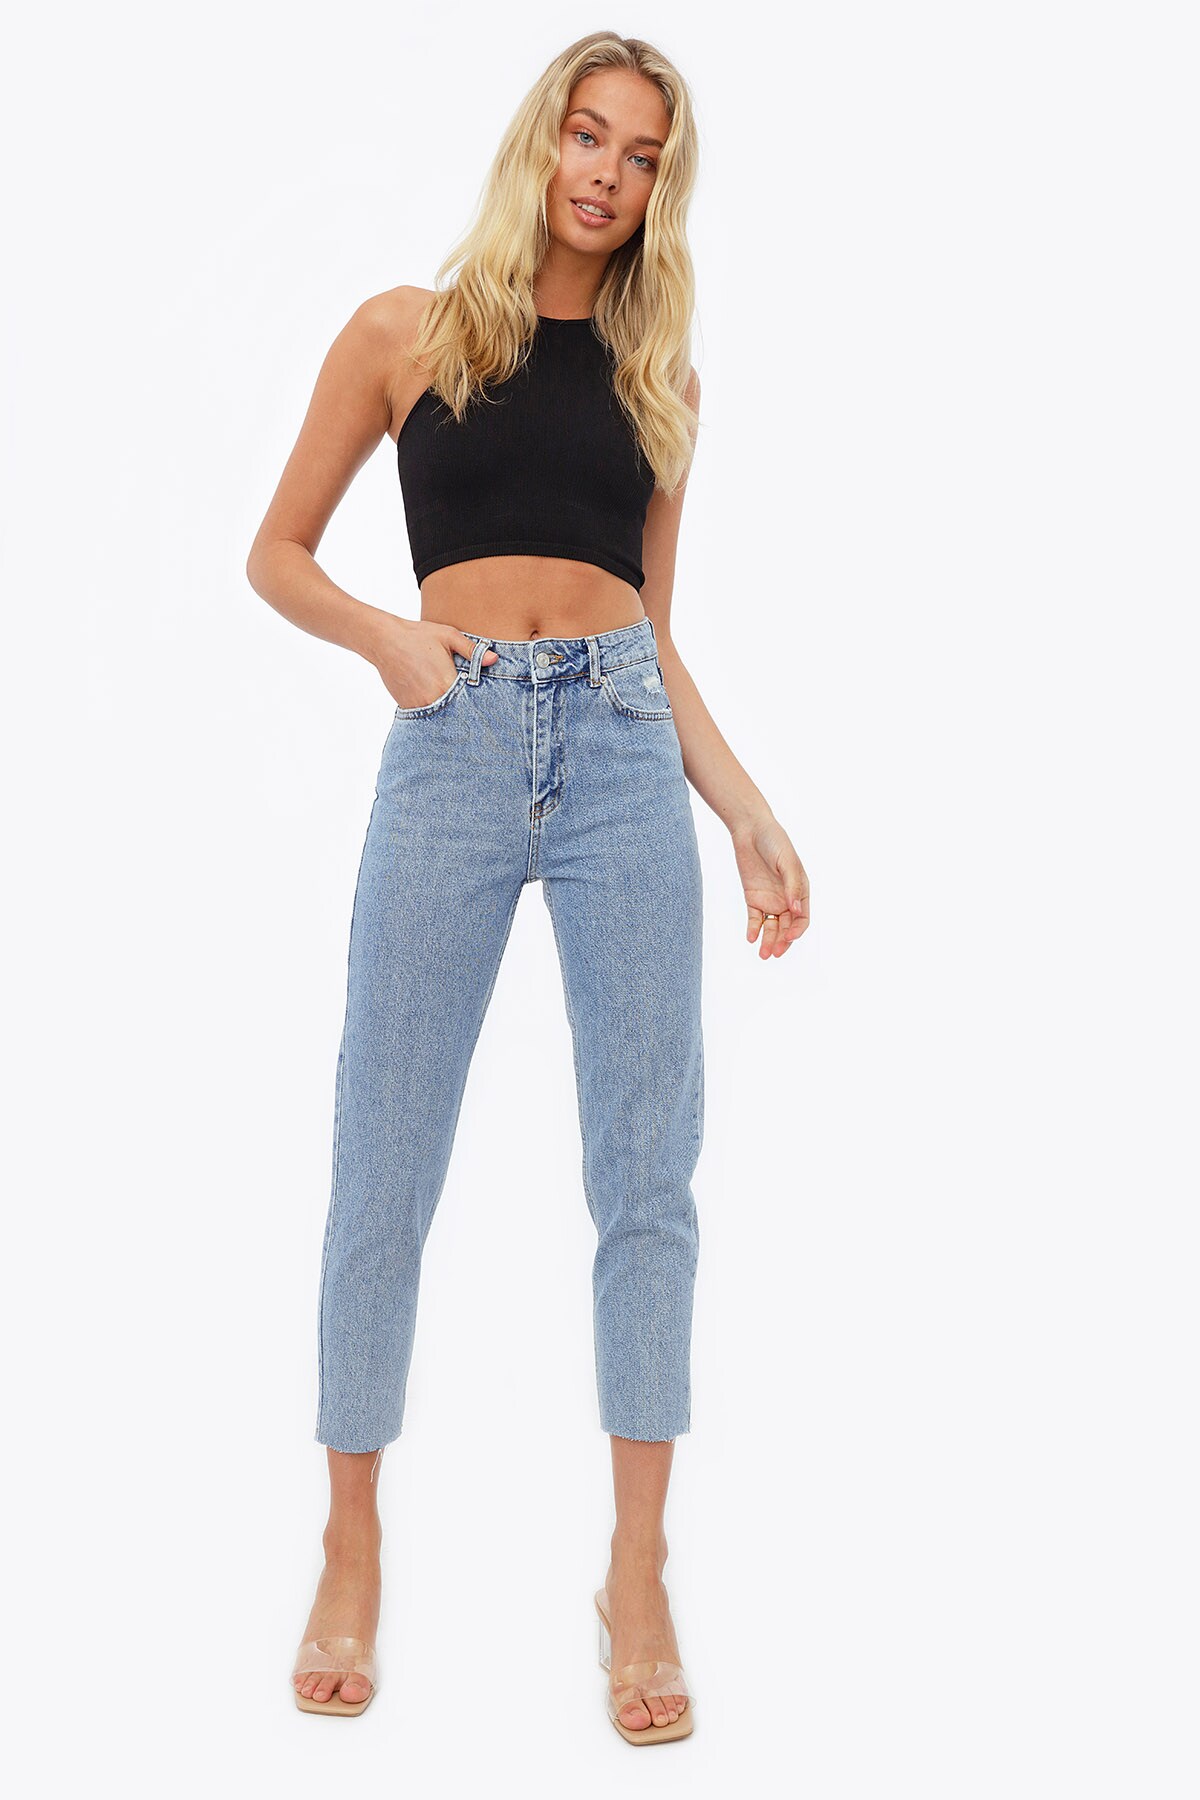 rock and roll jeans cheap